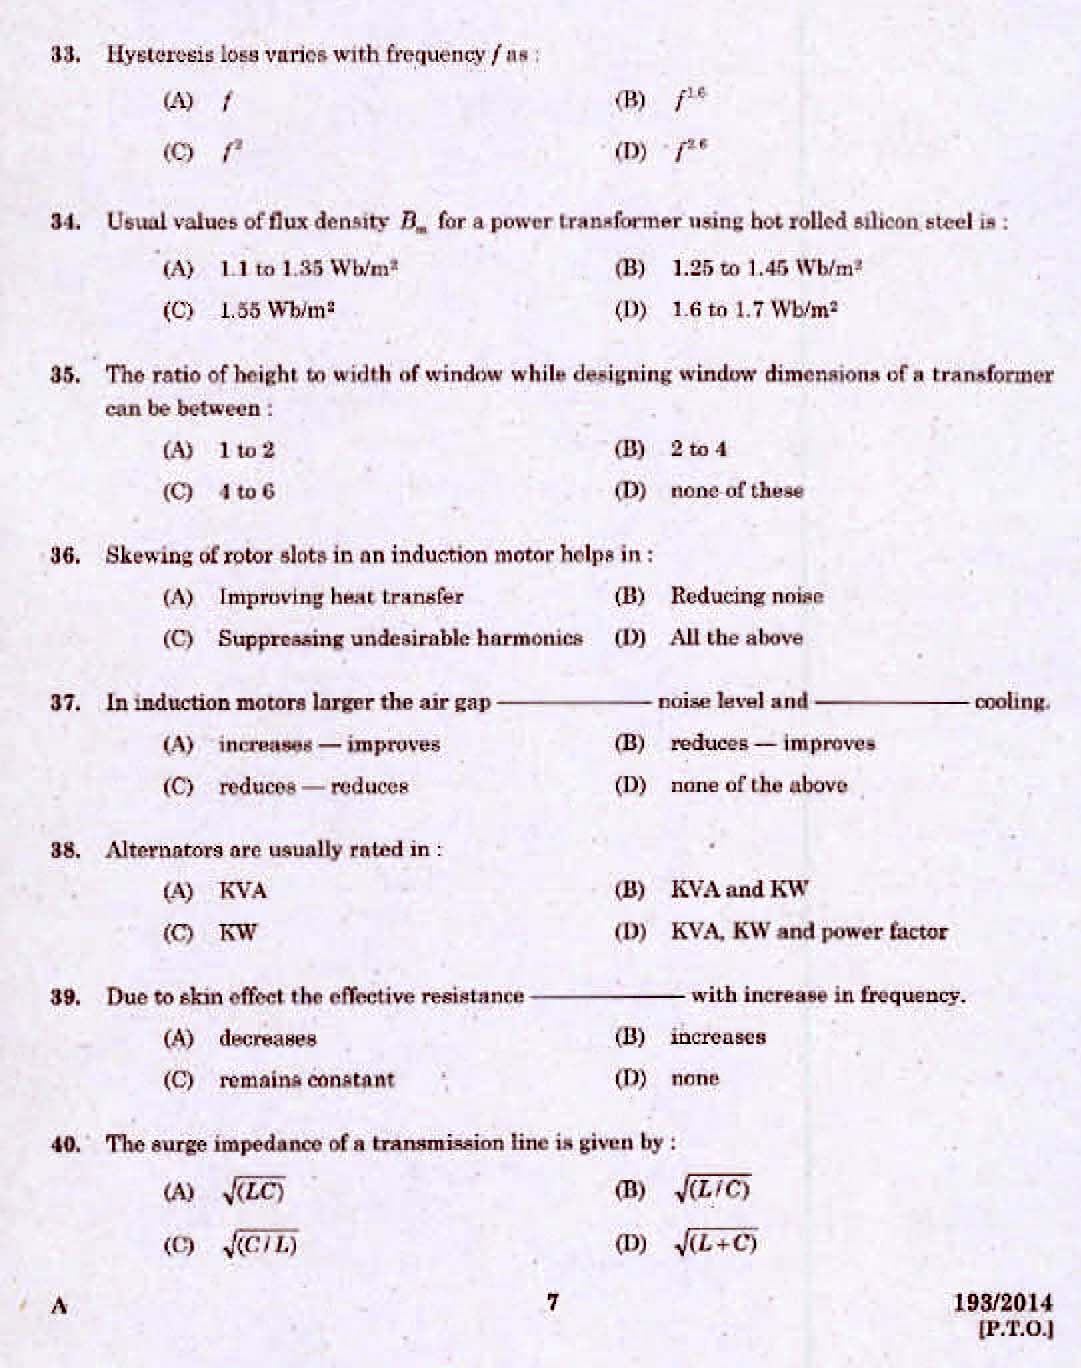 Kerala PSC Assistant Engineer Electrical Exam 2014 Question Paper Code 1932014 5